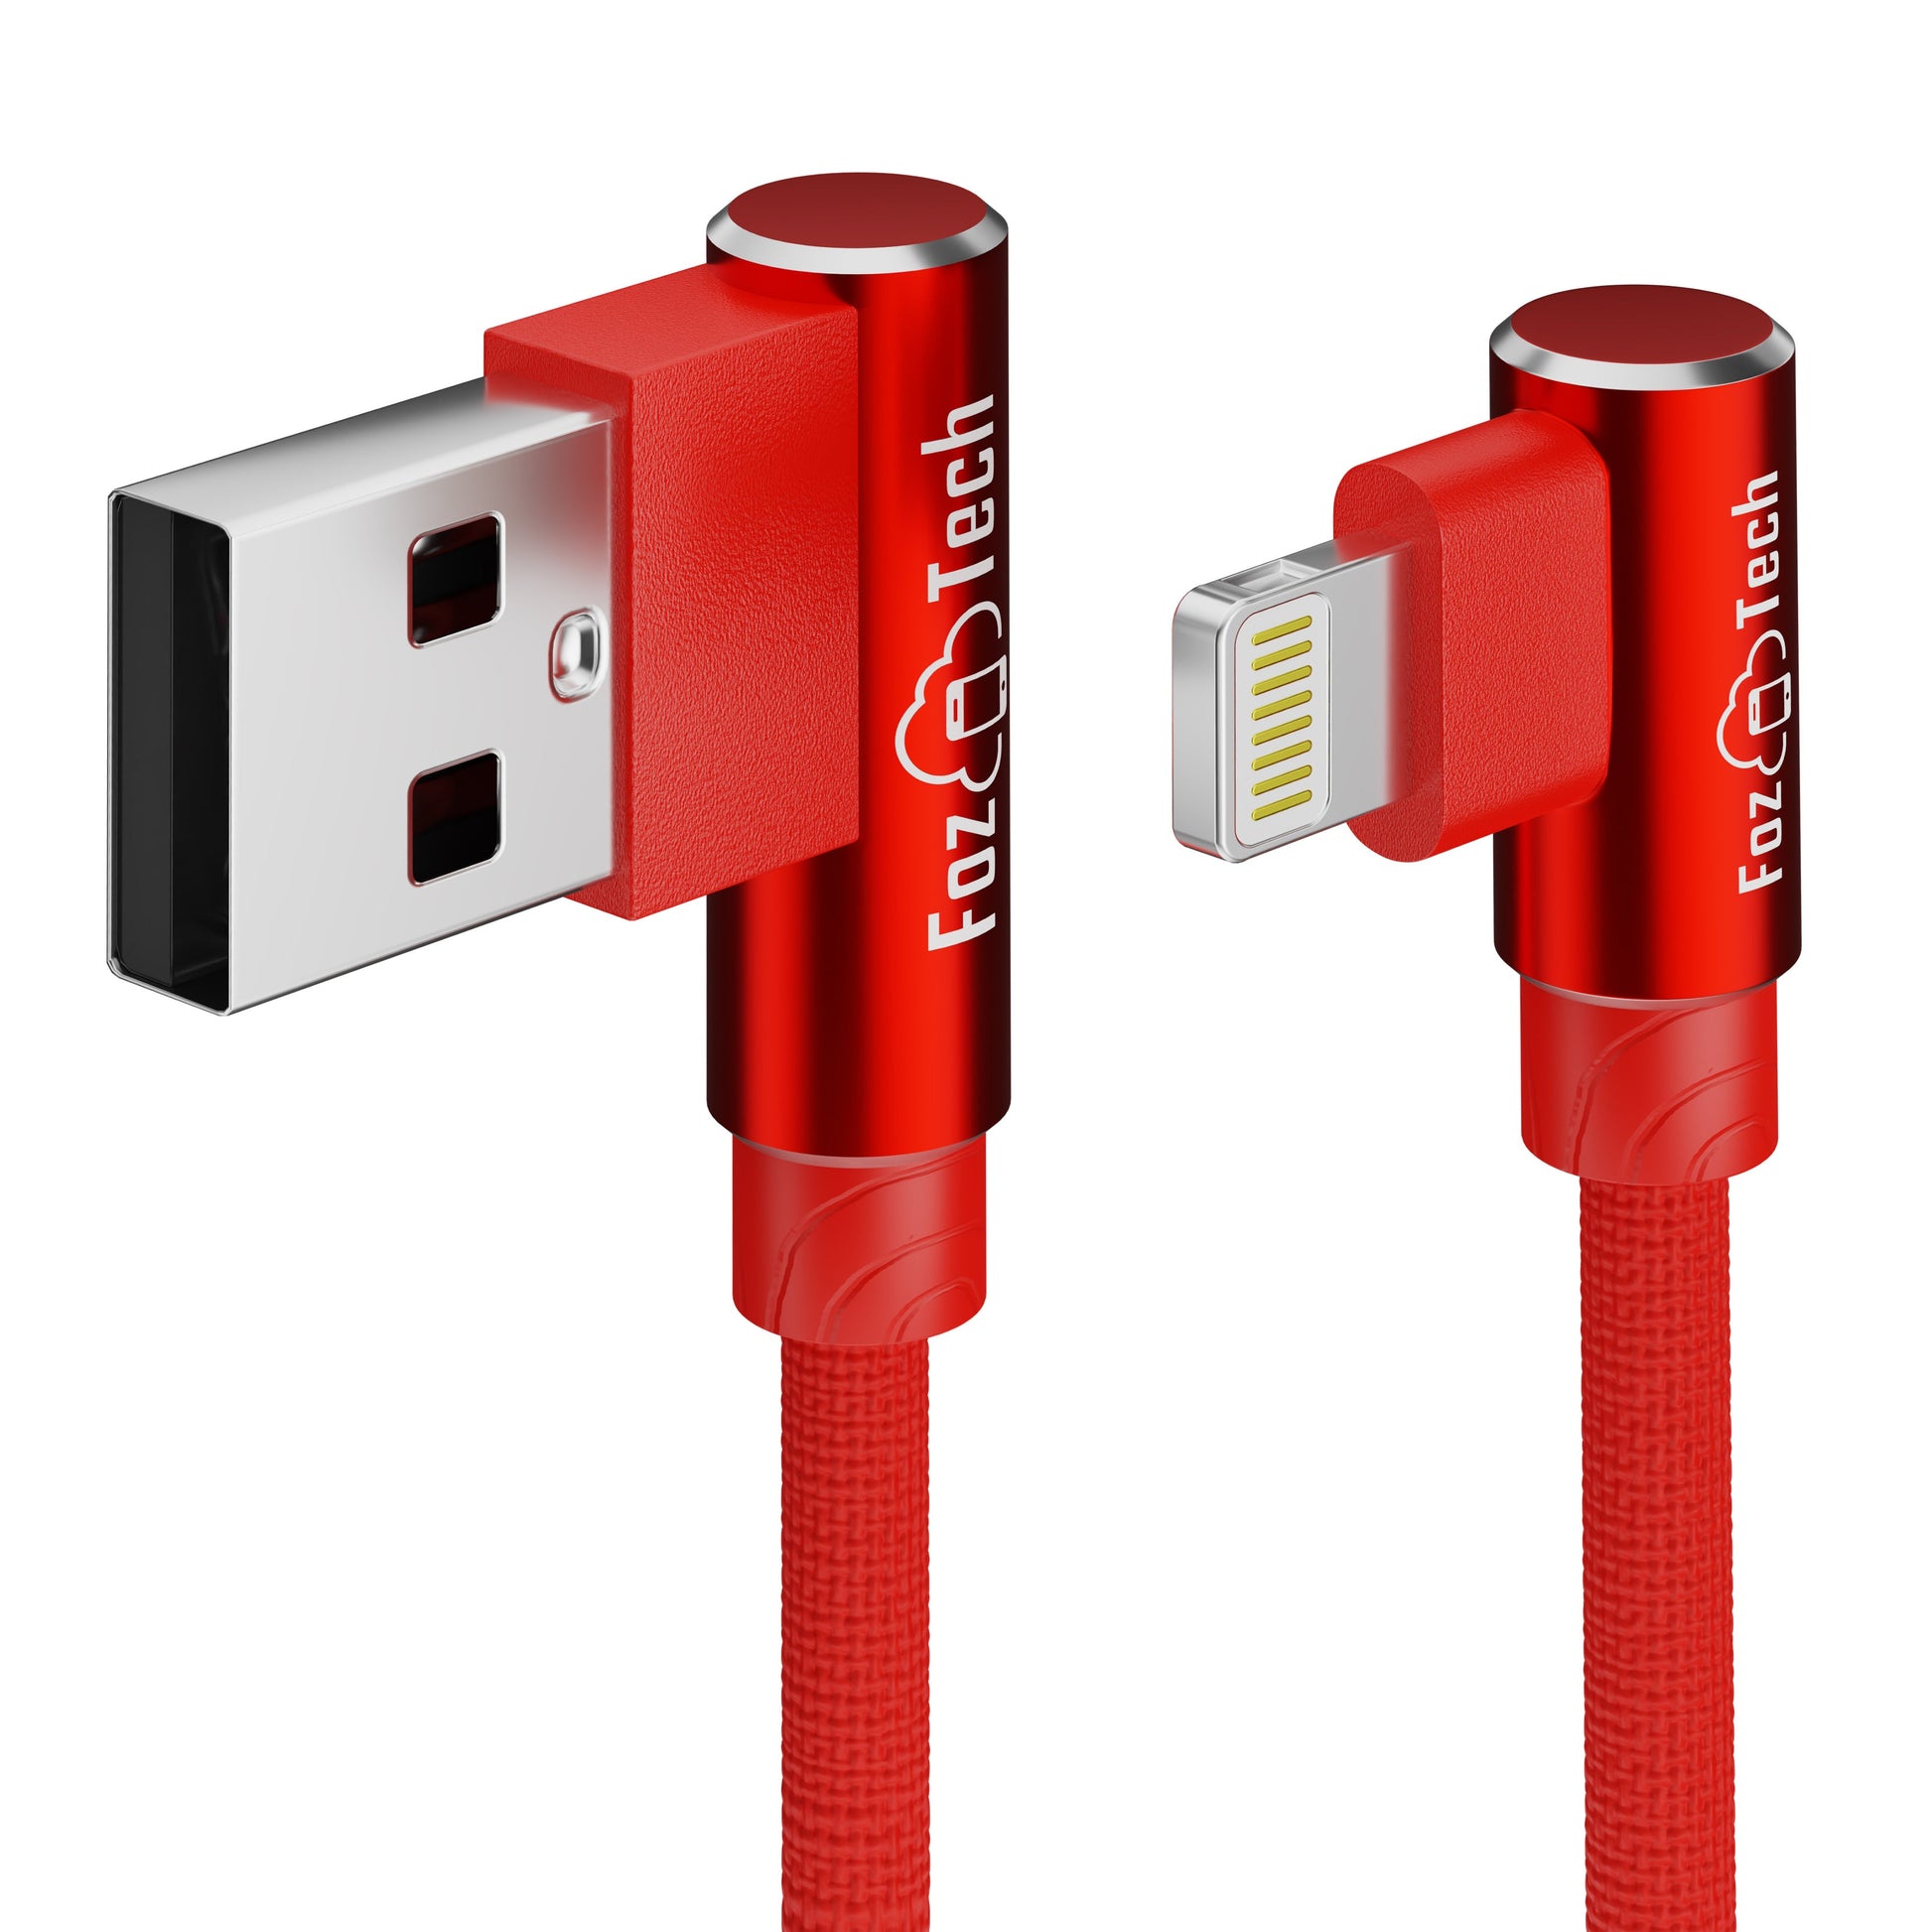 FozTech - Angled Series - Angled USB Charger Cable Data Sync Lead for iPhone, iPad, iPod - Red - USB Cable - FozTech